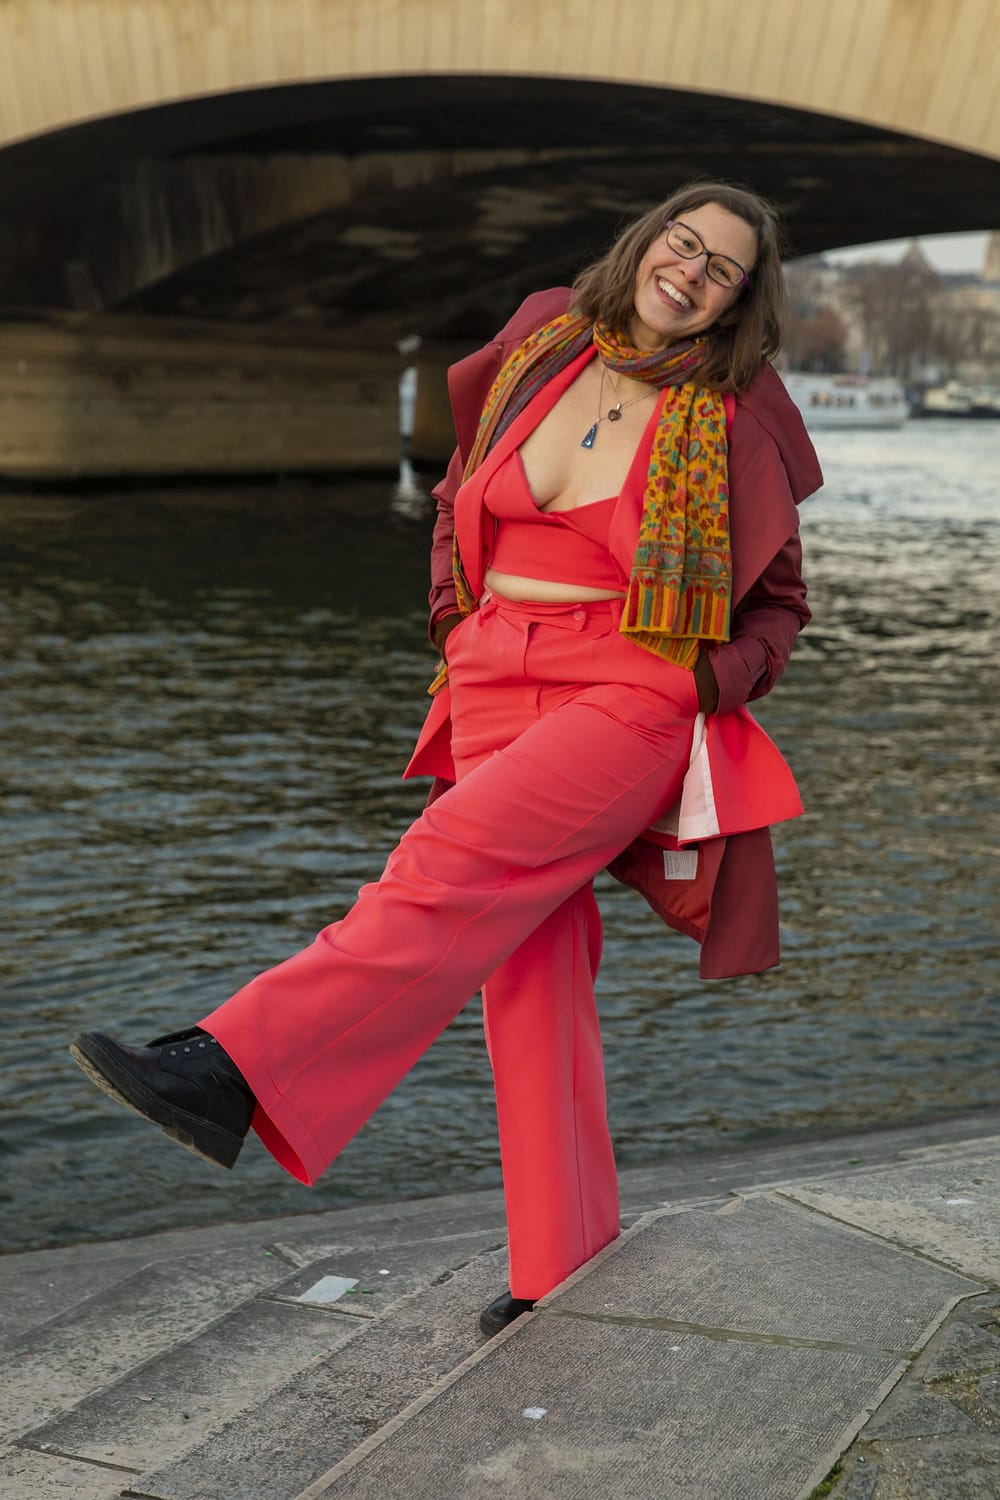 brown hair latina with light skin under a Paris bridge - Luna's a former academic (professor) of 20 years who quit academia to be a career clarity coach for mid-career lecturers, post-docs, professors who want a better life by leaving academia. Luna is in a 3 piece coral-colored suit and a huge smile while kicking the air playfully